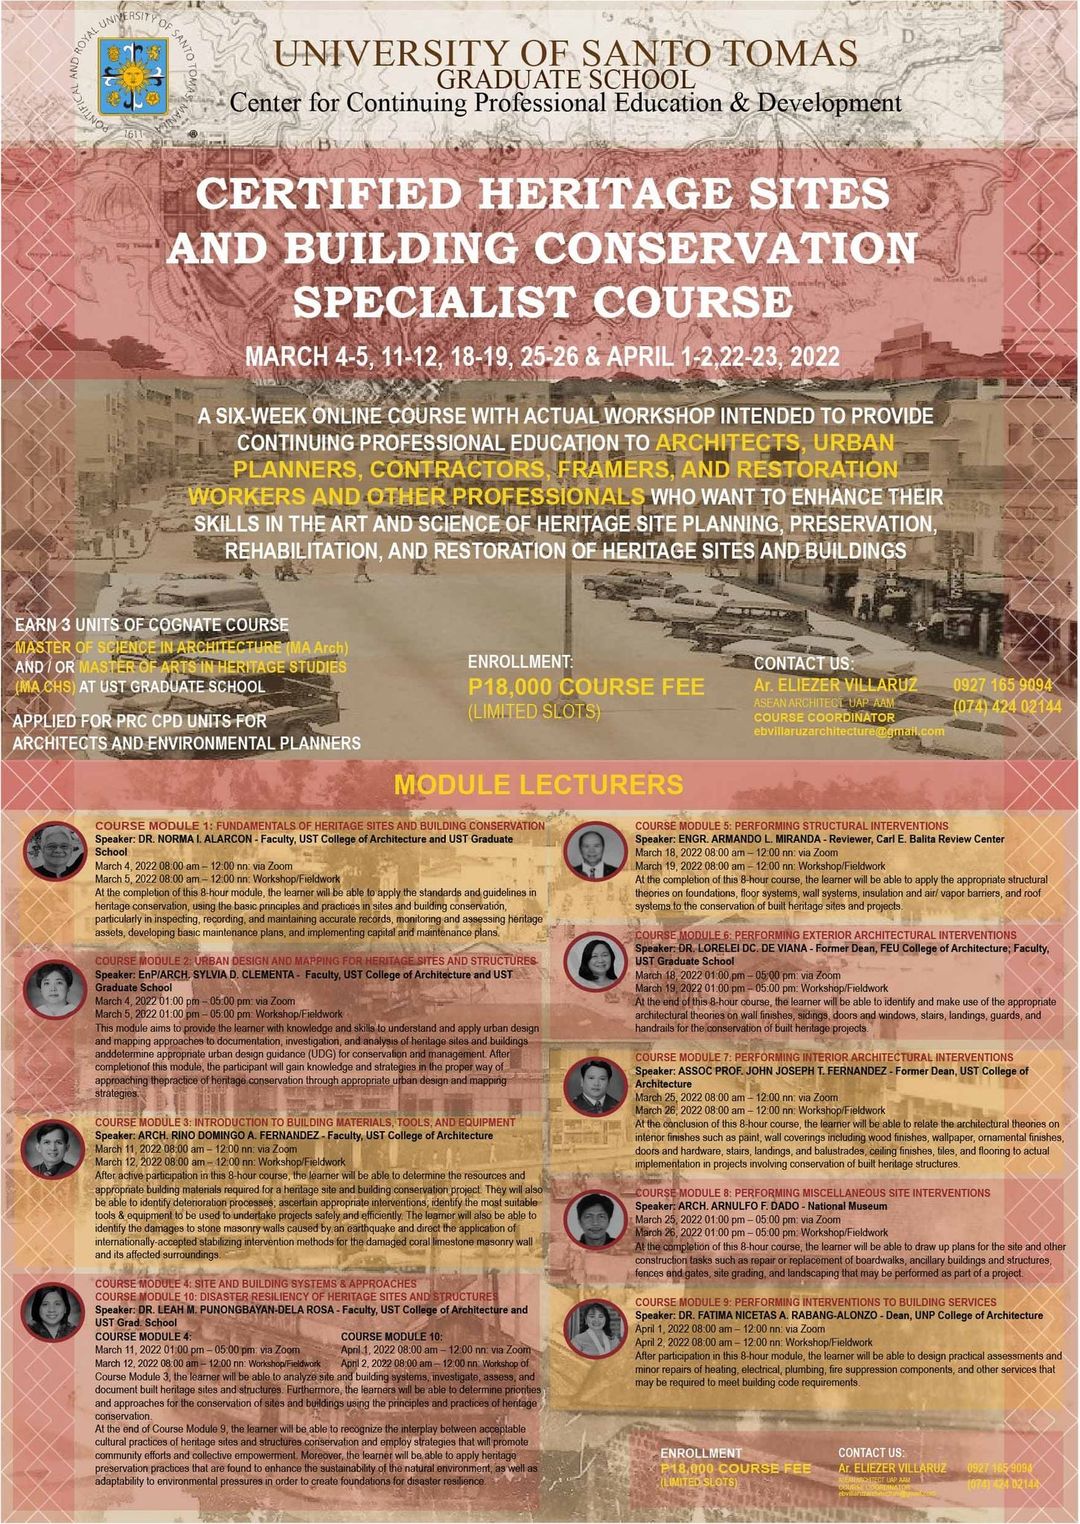 Certified Heritage Sites and Buildings Conservation Specialist Course